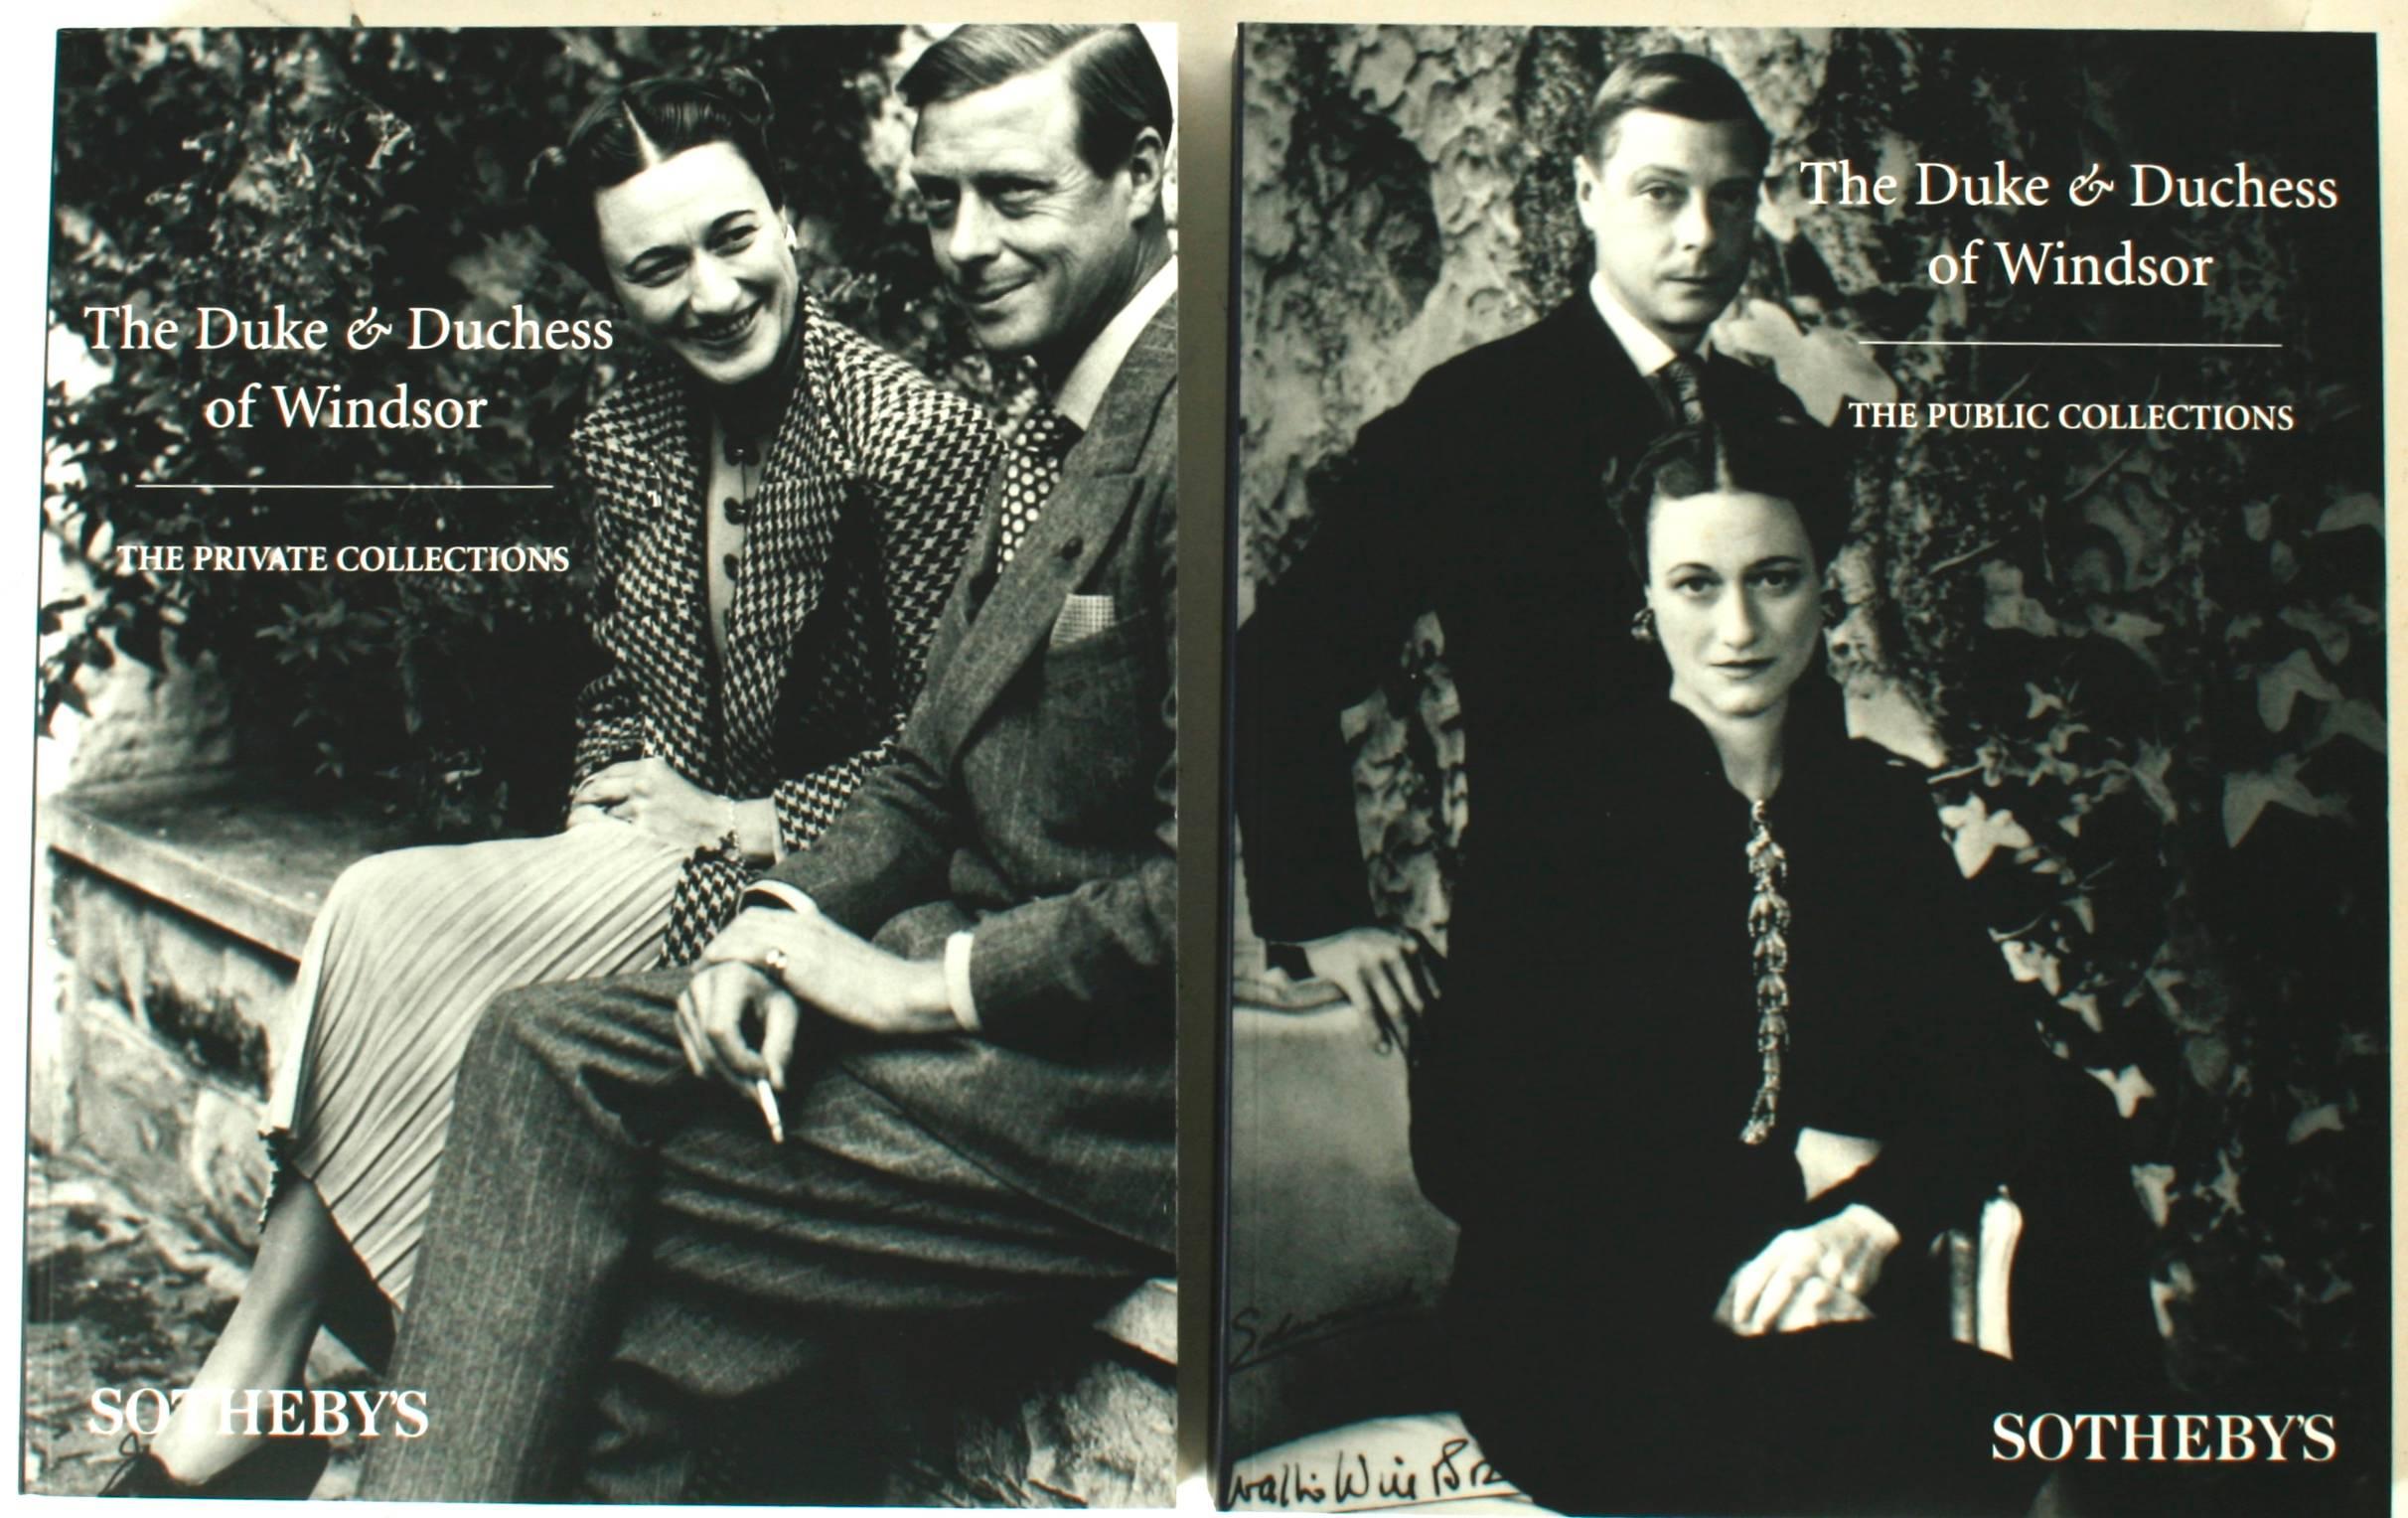 Sotheby's Catalogues from the Duke & Duchess of Windsor Auction 1